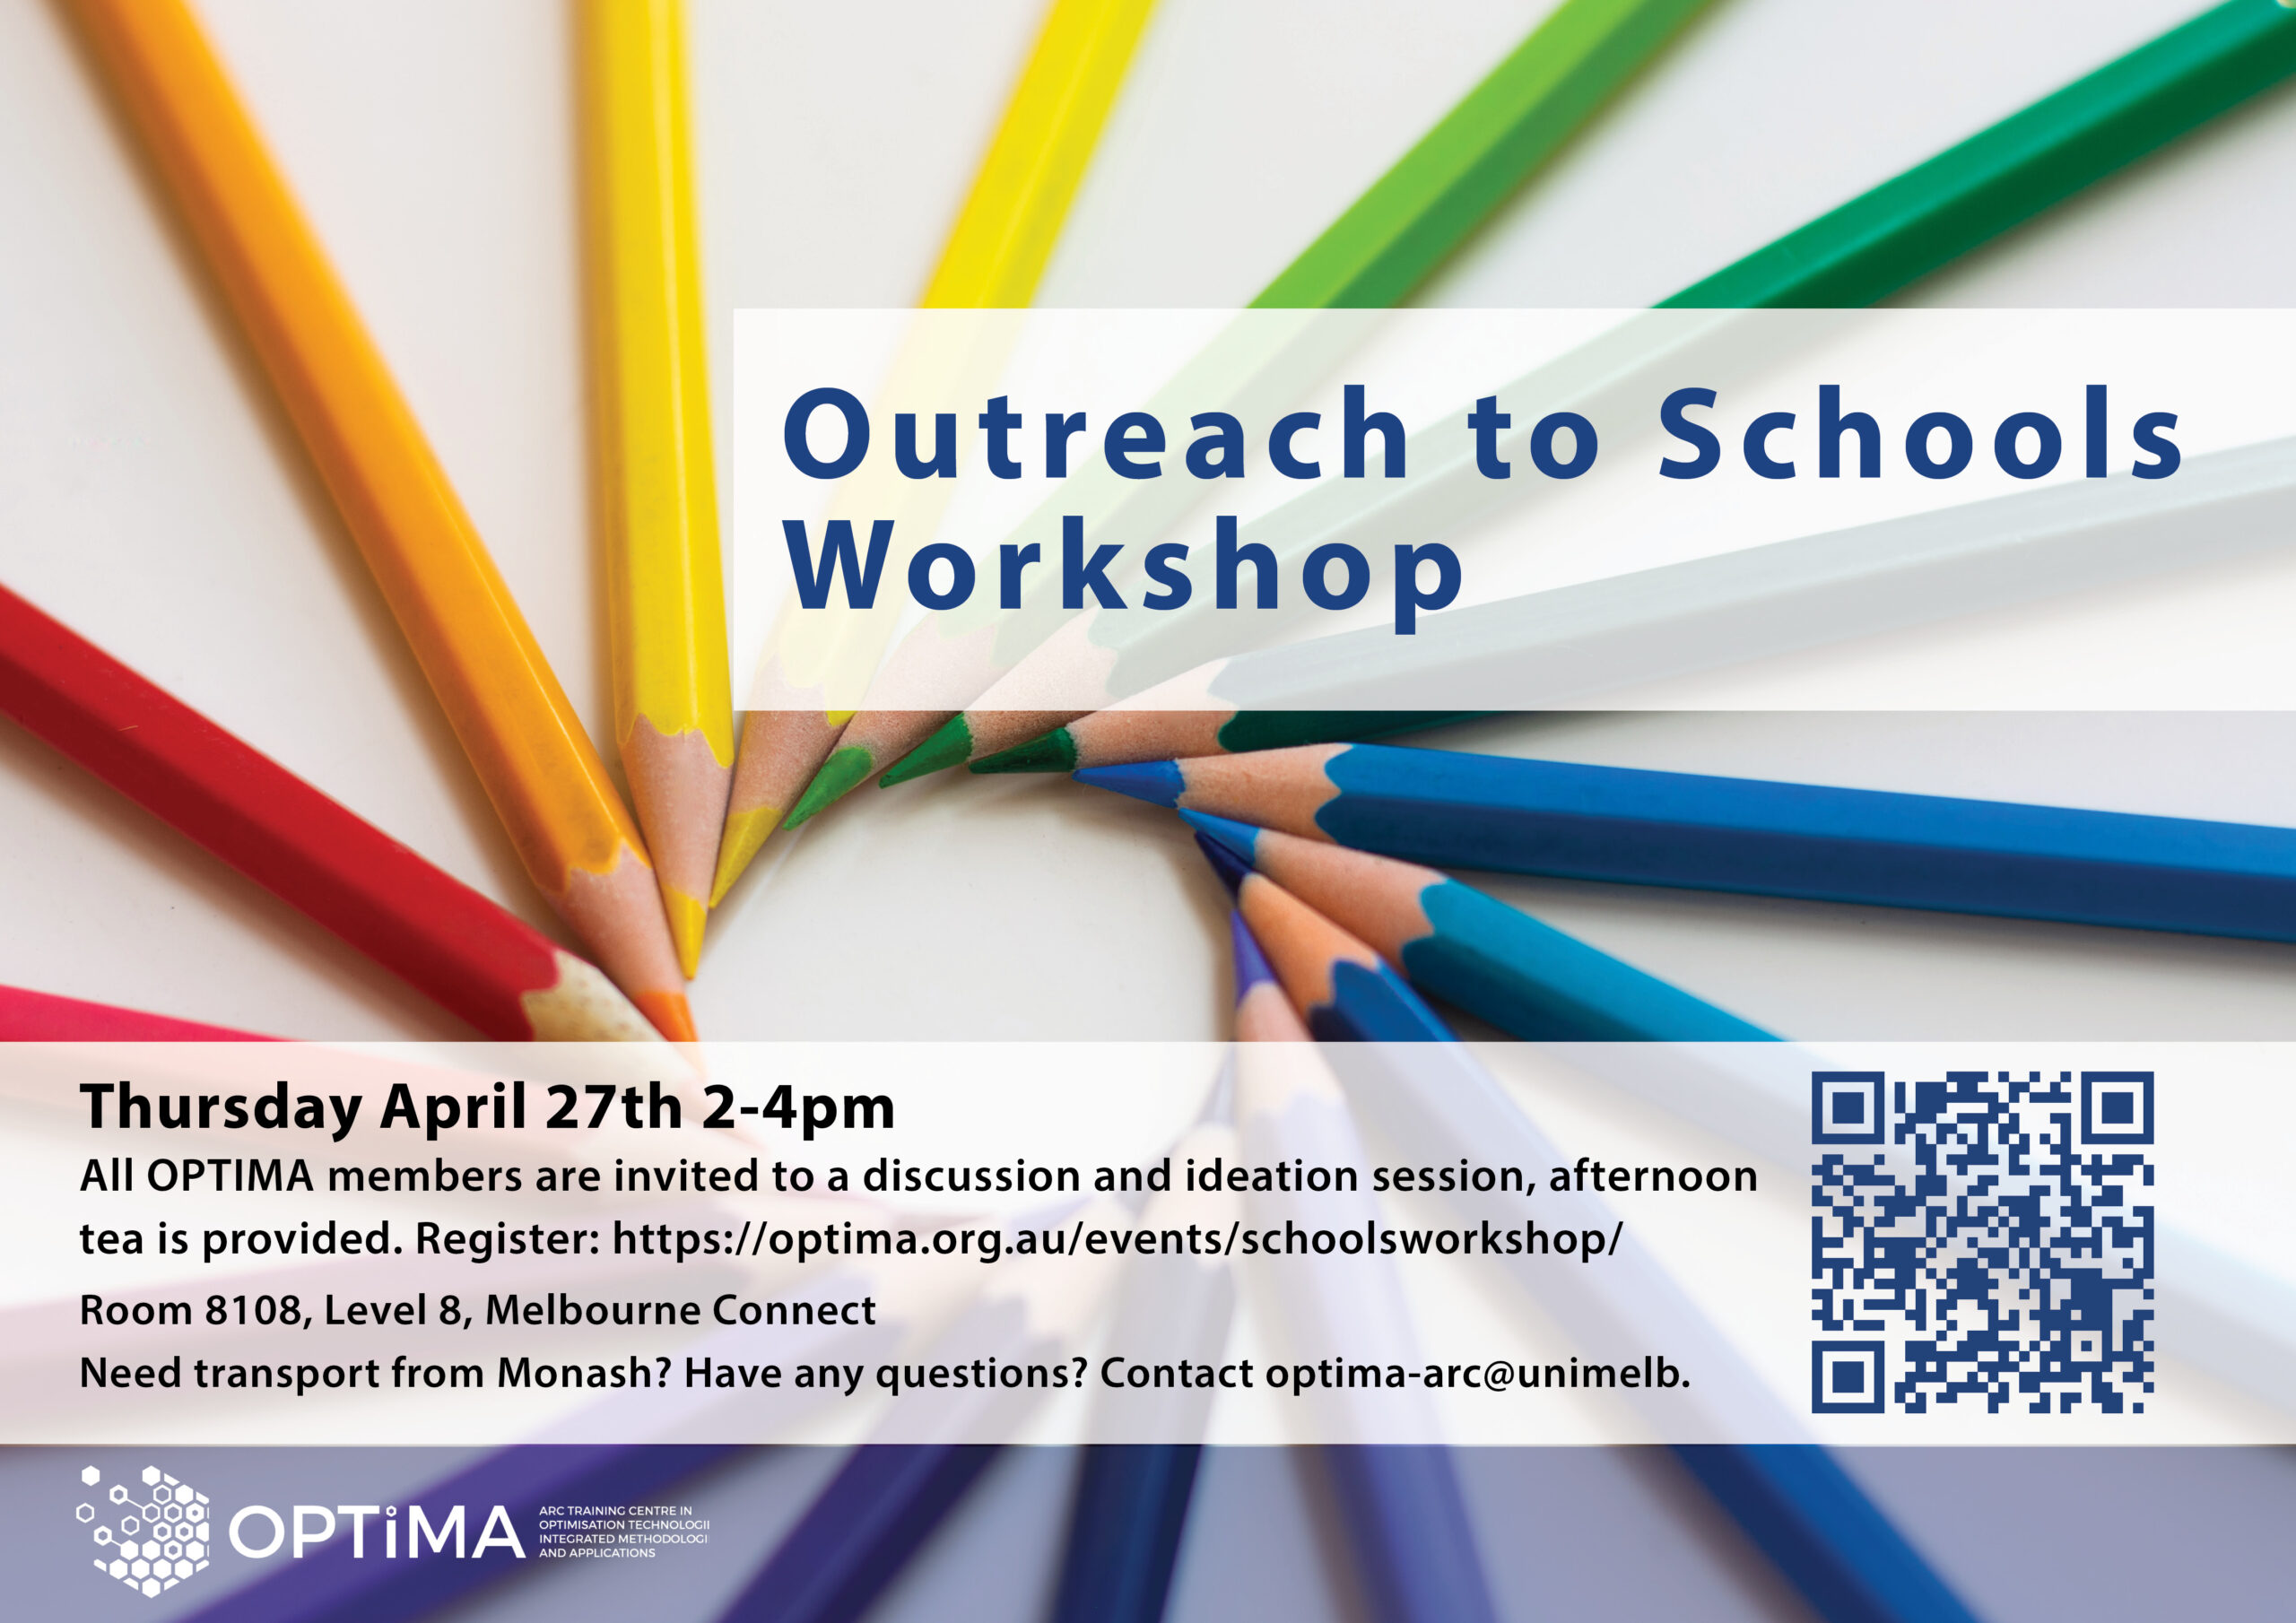 Coloured pencils form a bright circle in the background. Text announces Outreach to Schools Workshop Thursday April 27th 2-4pm